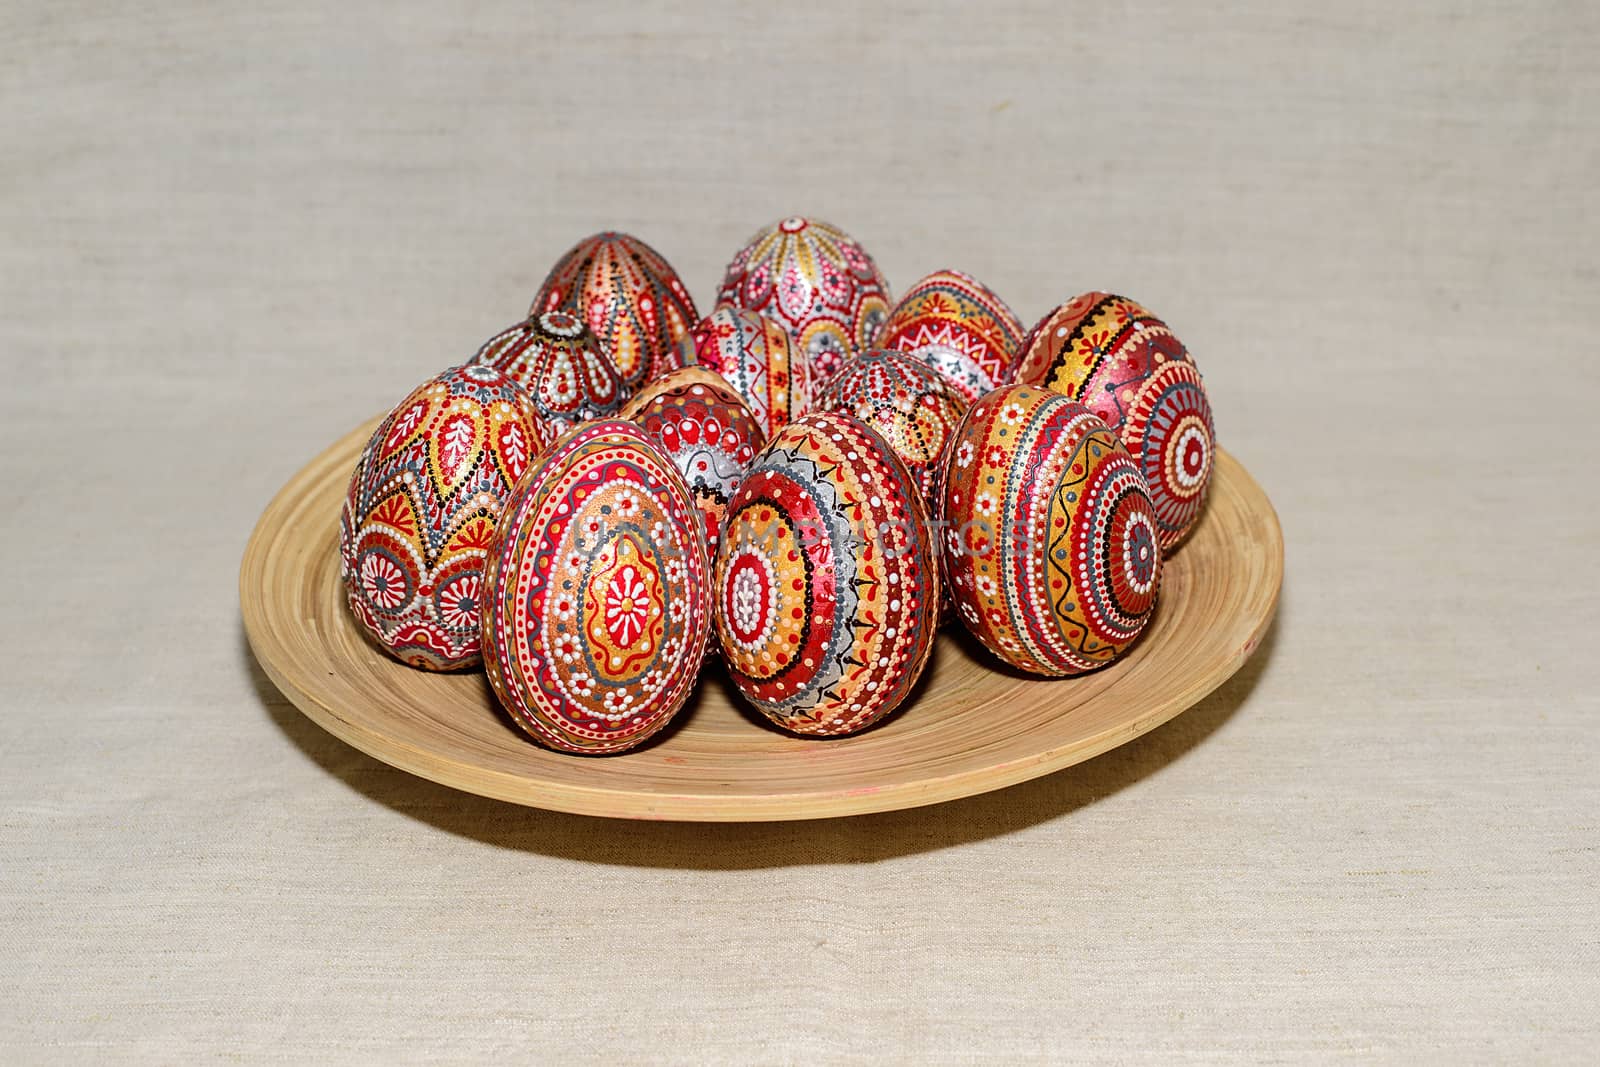 Easter eggs, the hand-painted with acrylic paints.